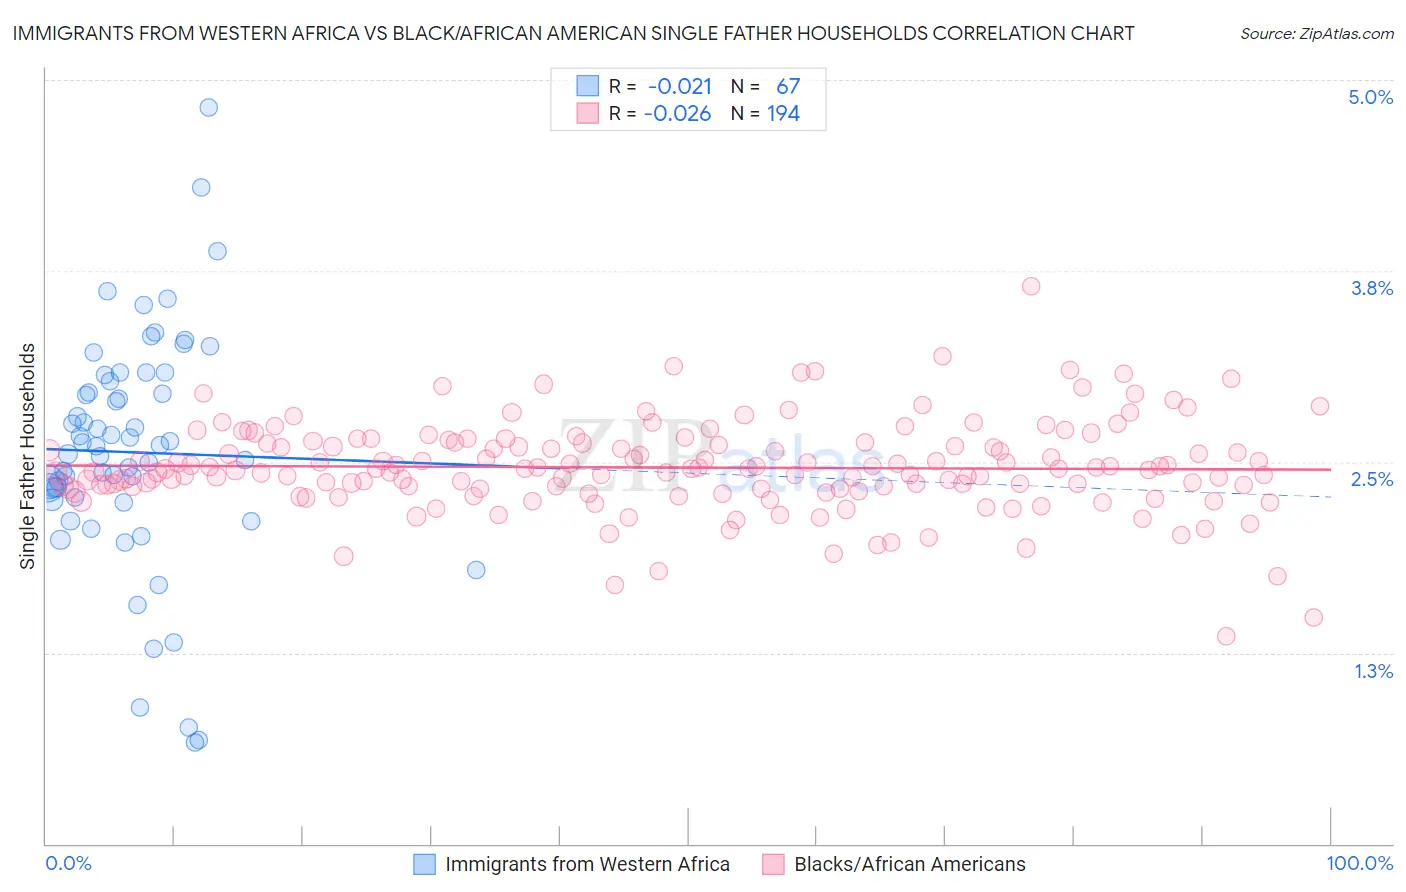 Immigrants from Western Africa vs Black/African American Single Father Households